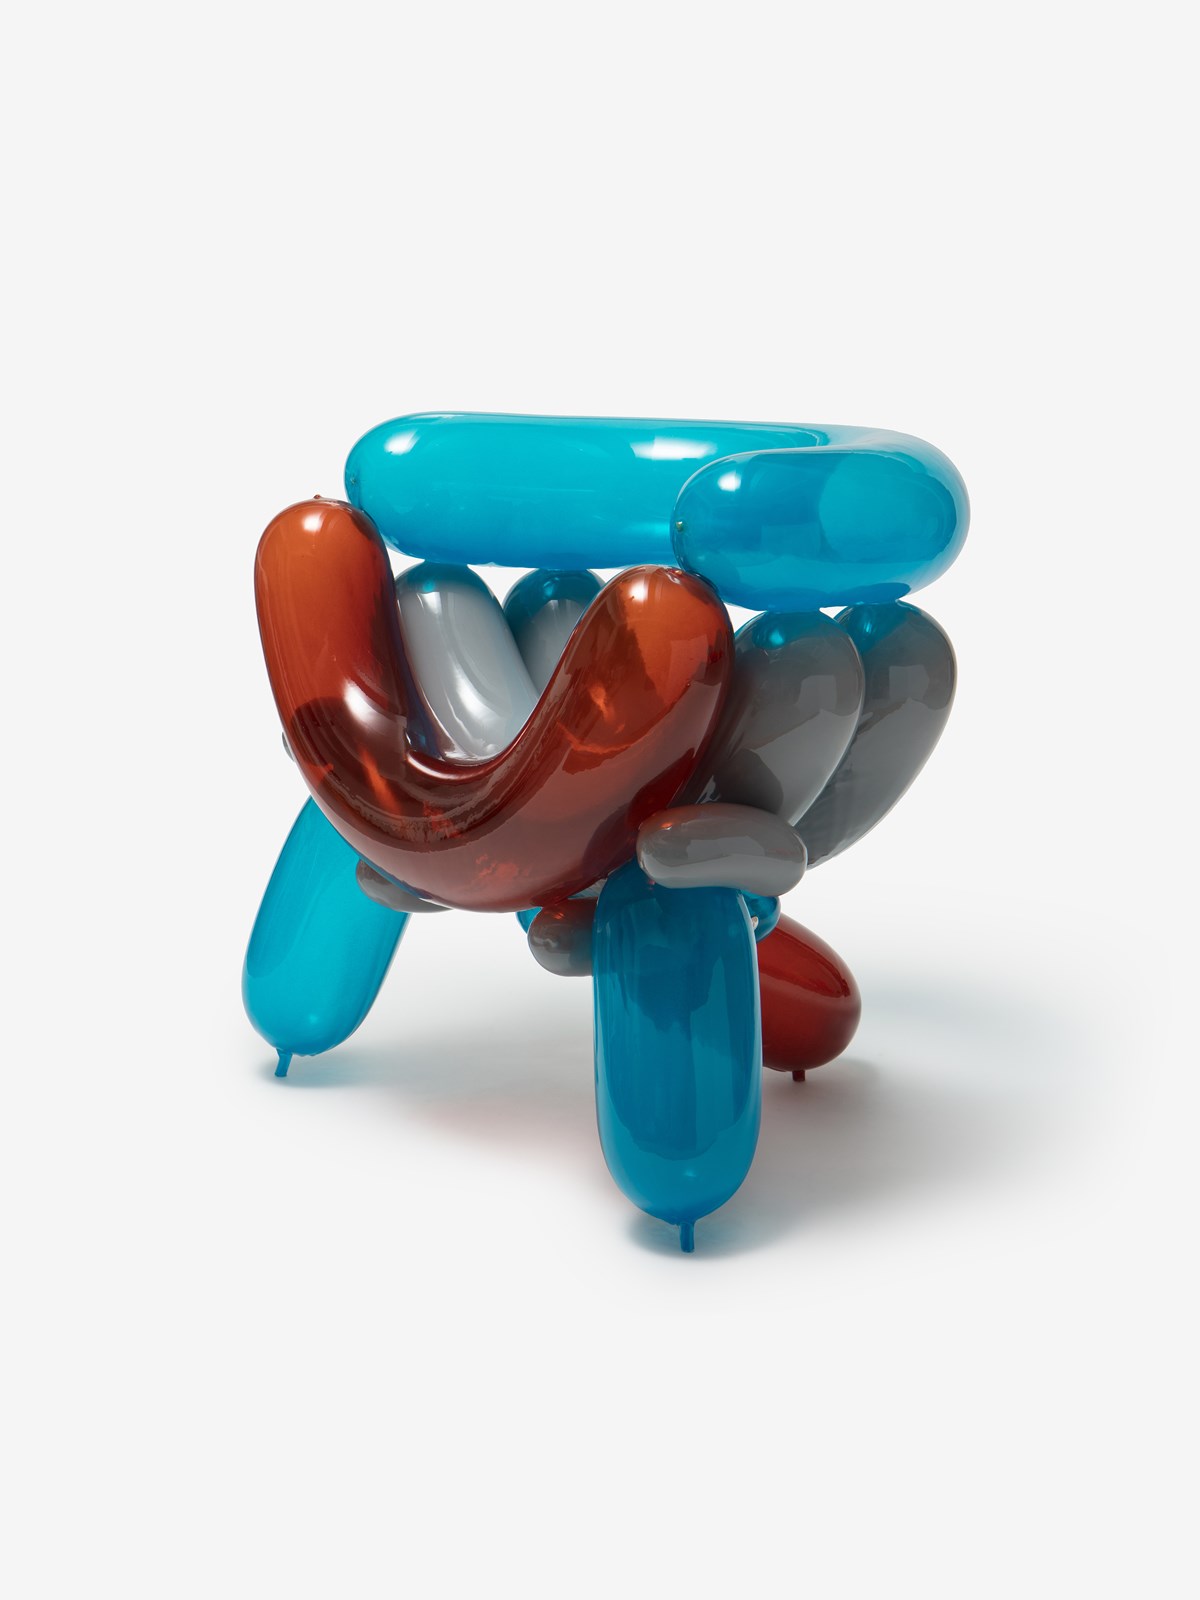 Blowing Series Furniture Collection by Seungjin Yang